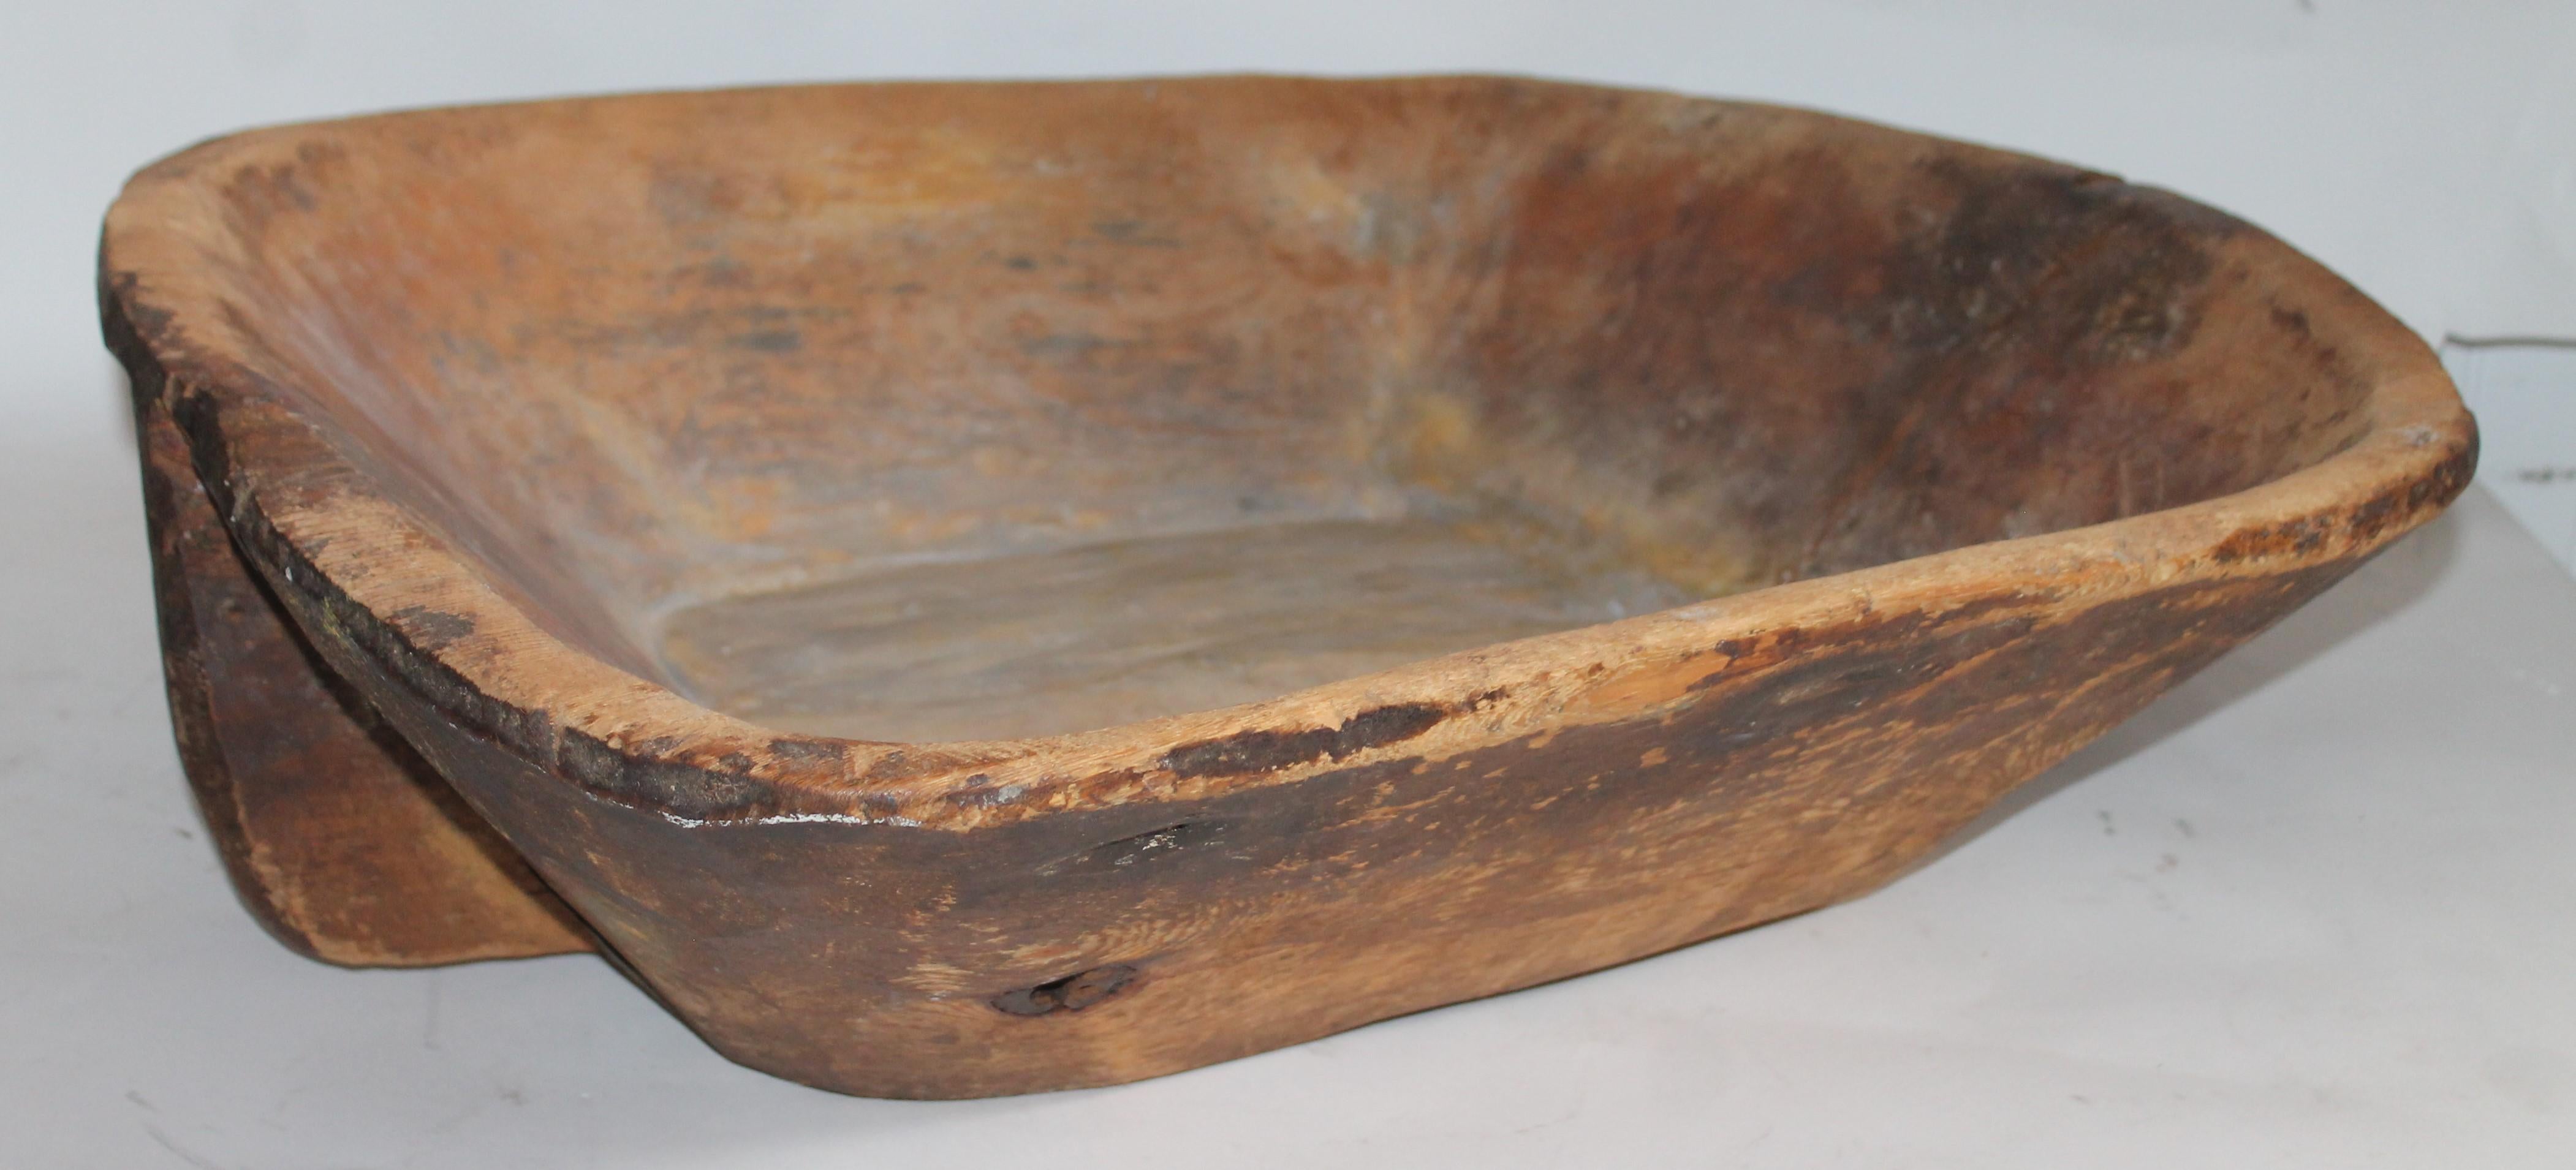 19th century hand carved dough bowl with handles is very primitive with a great surface. The condition is very good and super rustic.